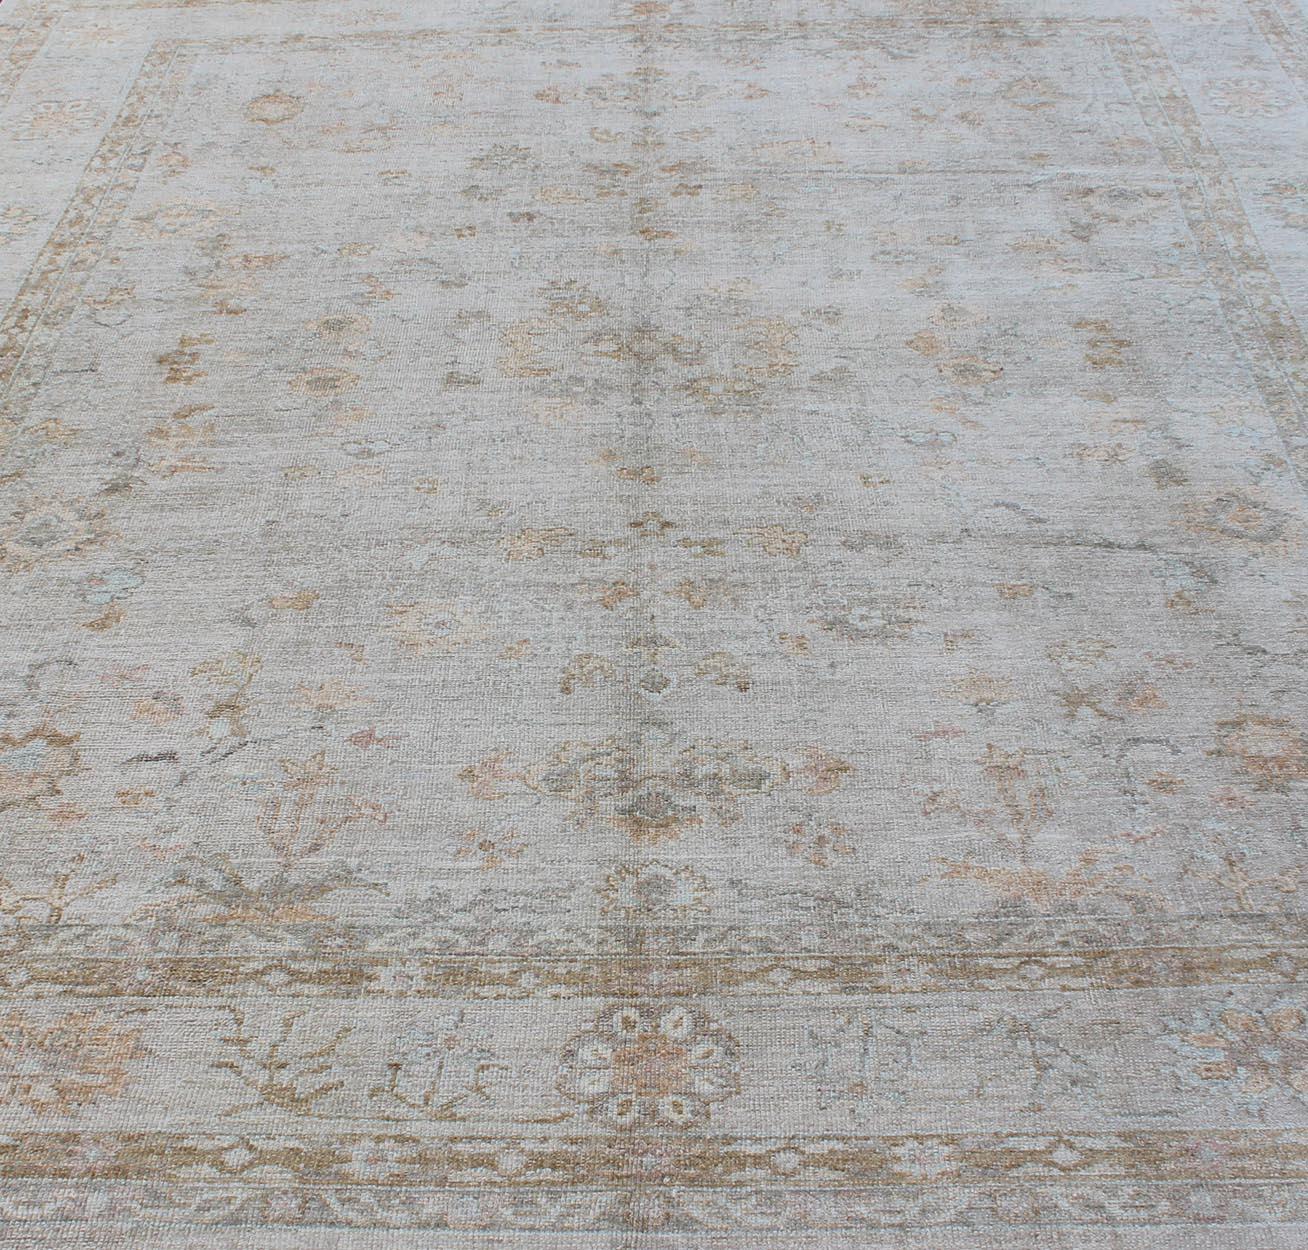 Large Turkish Angora Oushak Rug with All-Over Vining Floral Design in Neutral Co For Sale 5